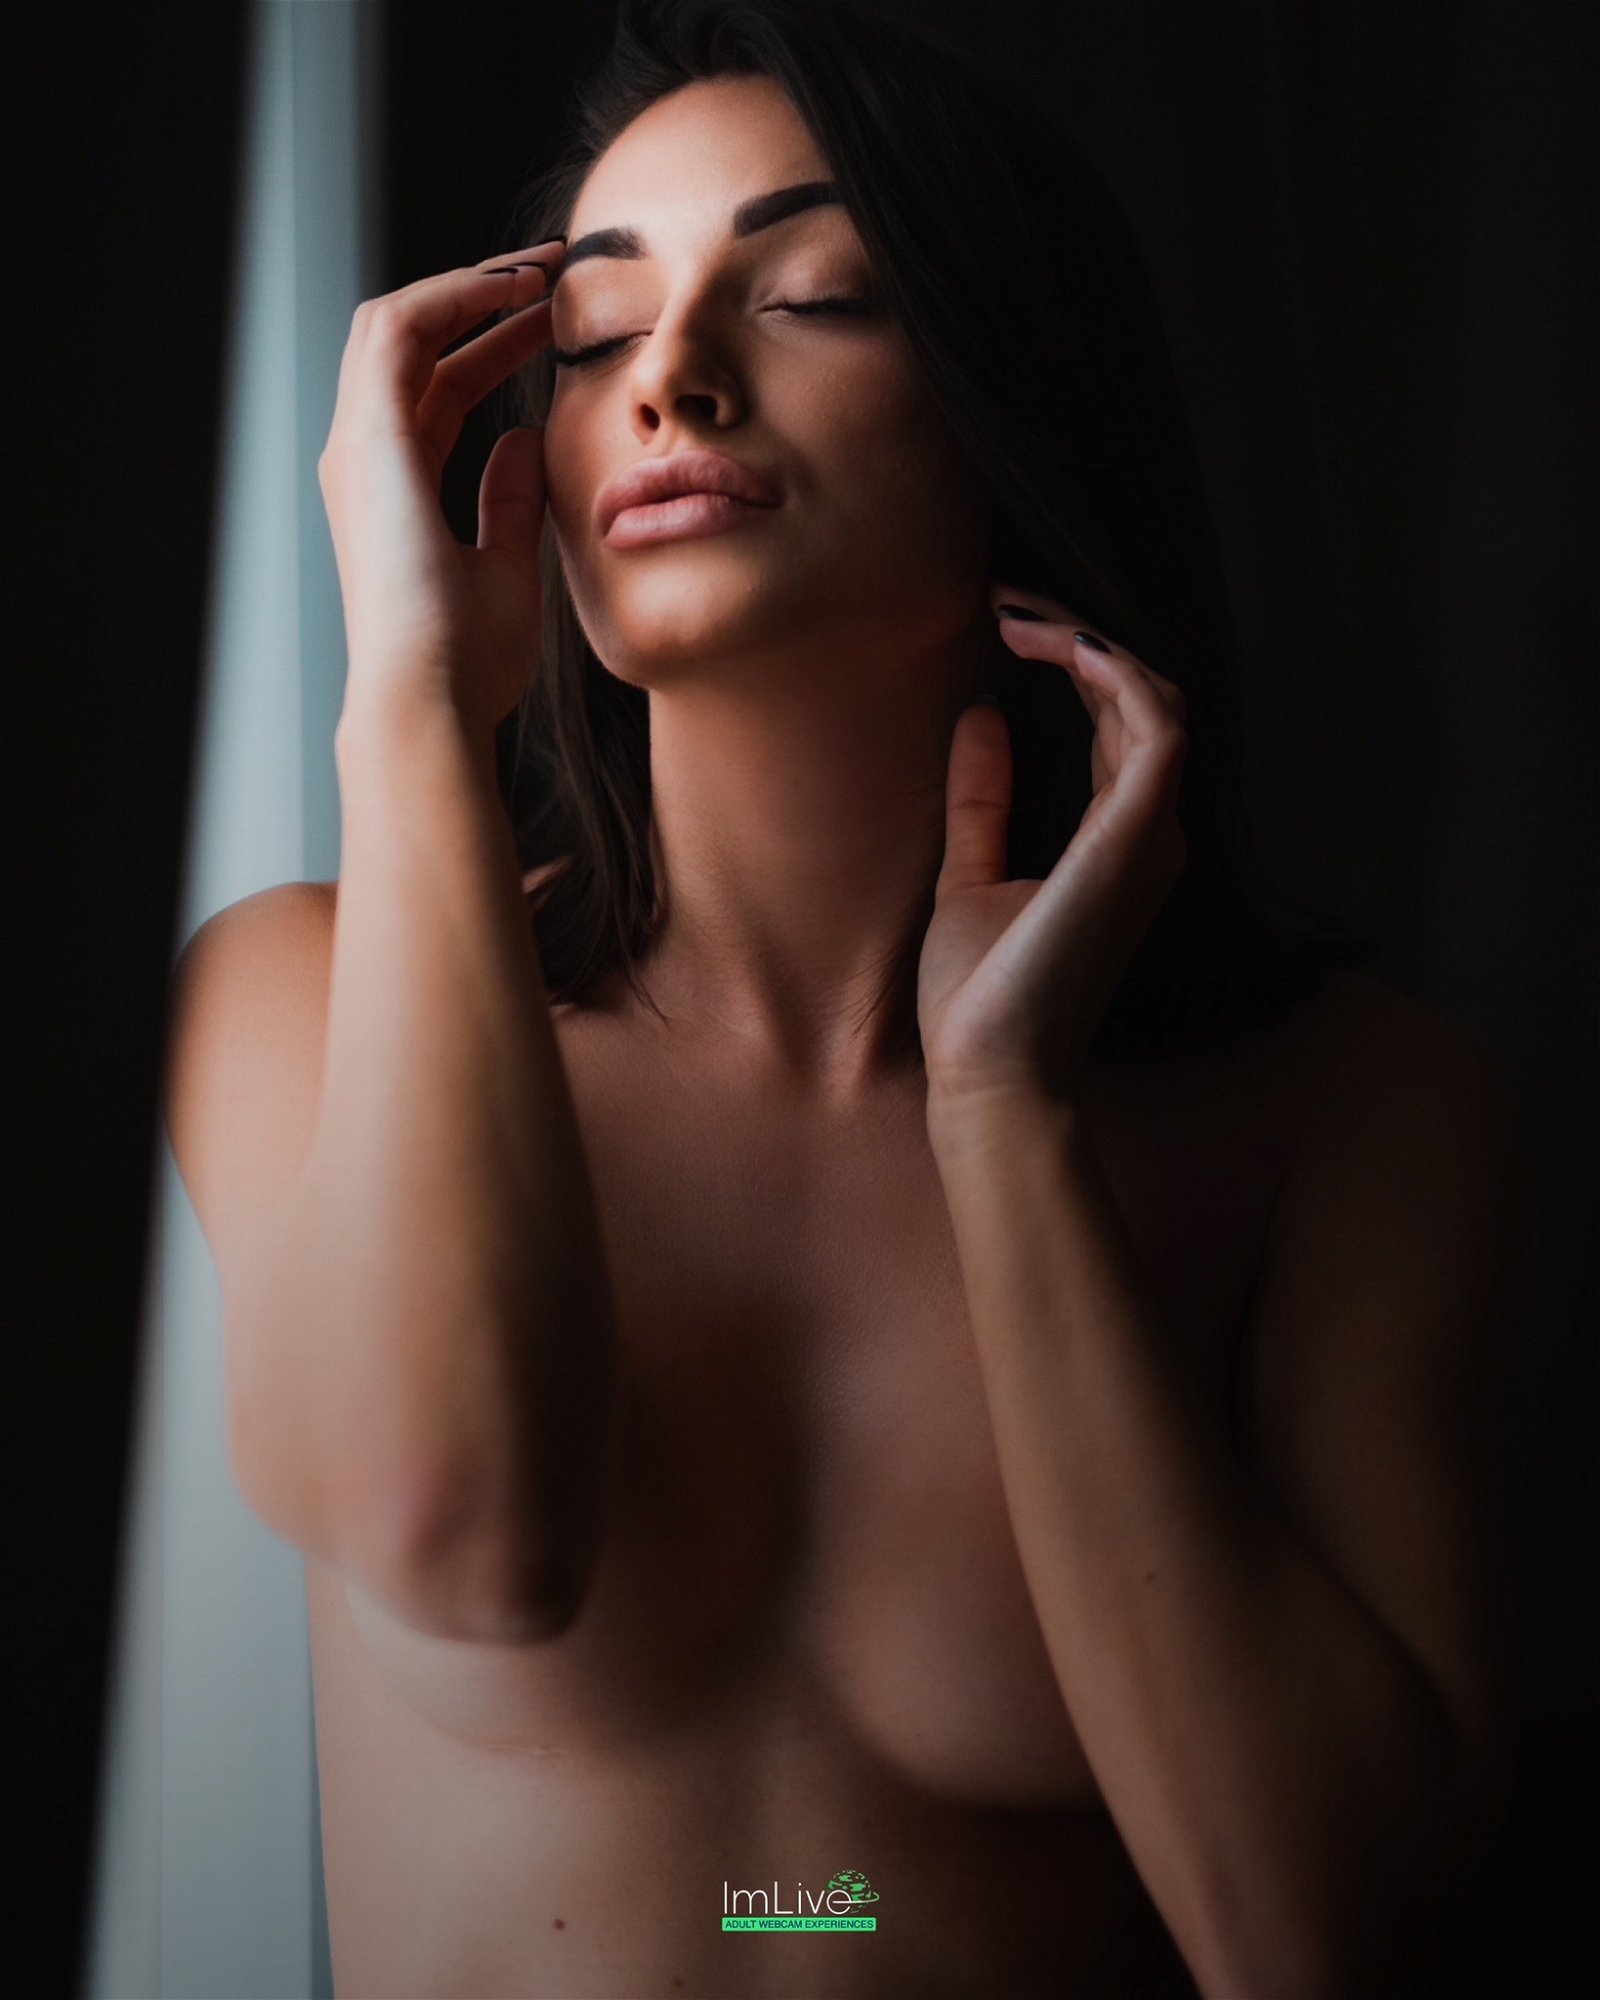 Photo by ImLive with the username @imlivenet, who is a brand user,  November 14, 2020 at 8:25 PM. The post is about the topic Brunette Beauties and the text says 'Check #barbaramonnroe’s new shooting 🔥 If you want she’s online ImLive

👉 http://imlurl.com/4Bhyvu 

[#imliveonImlive #pornlive #livecam #chatlive #stayhomedontdate #Ass #Sexy #porn #webcam #horny #pornovideo #pornogirl #porno #pornhub #pornstar..'